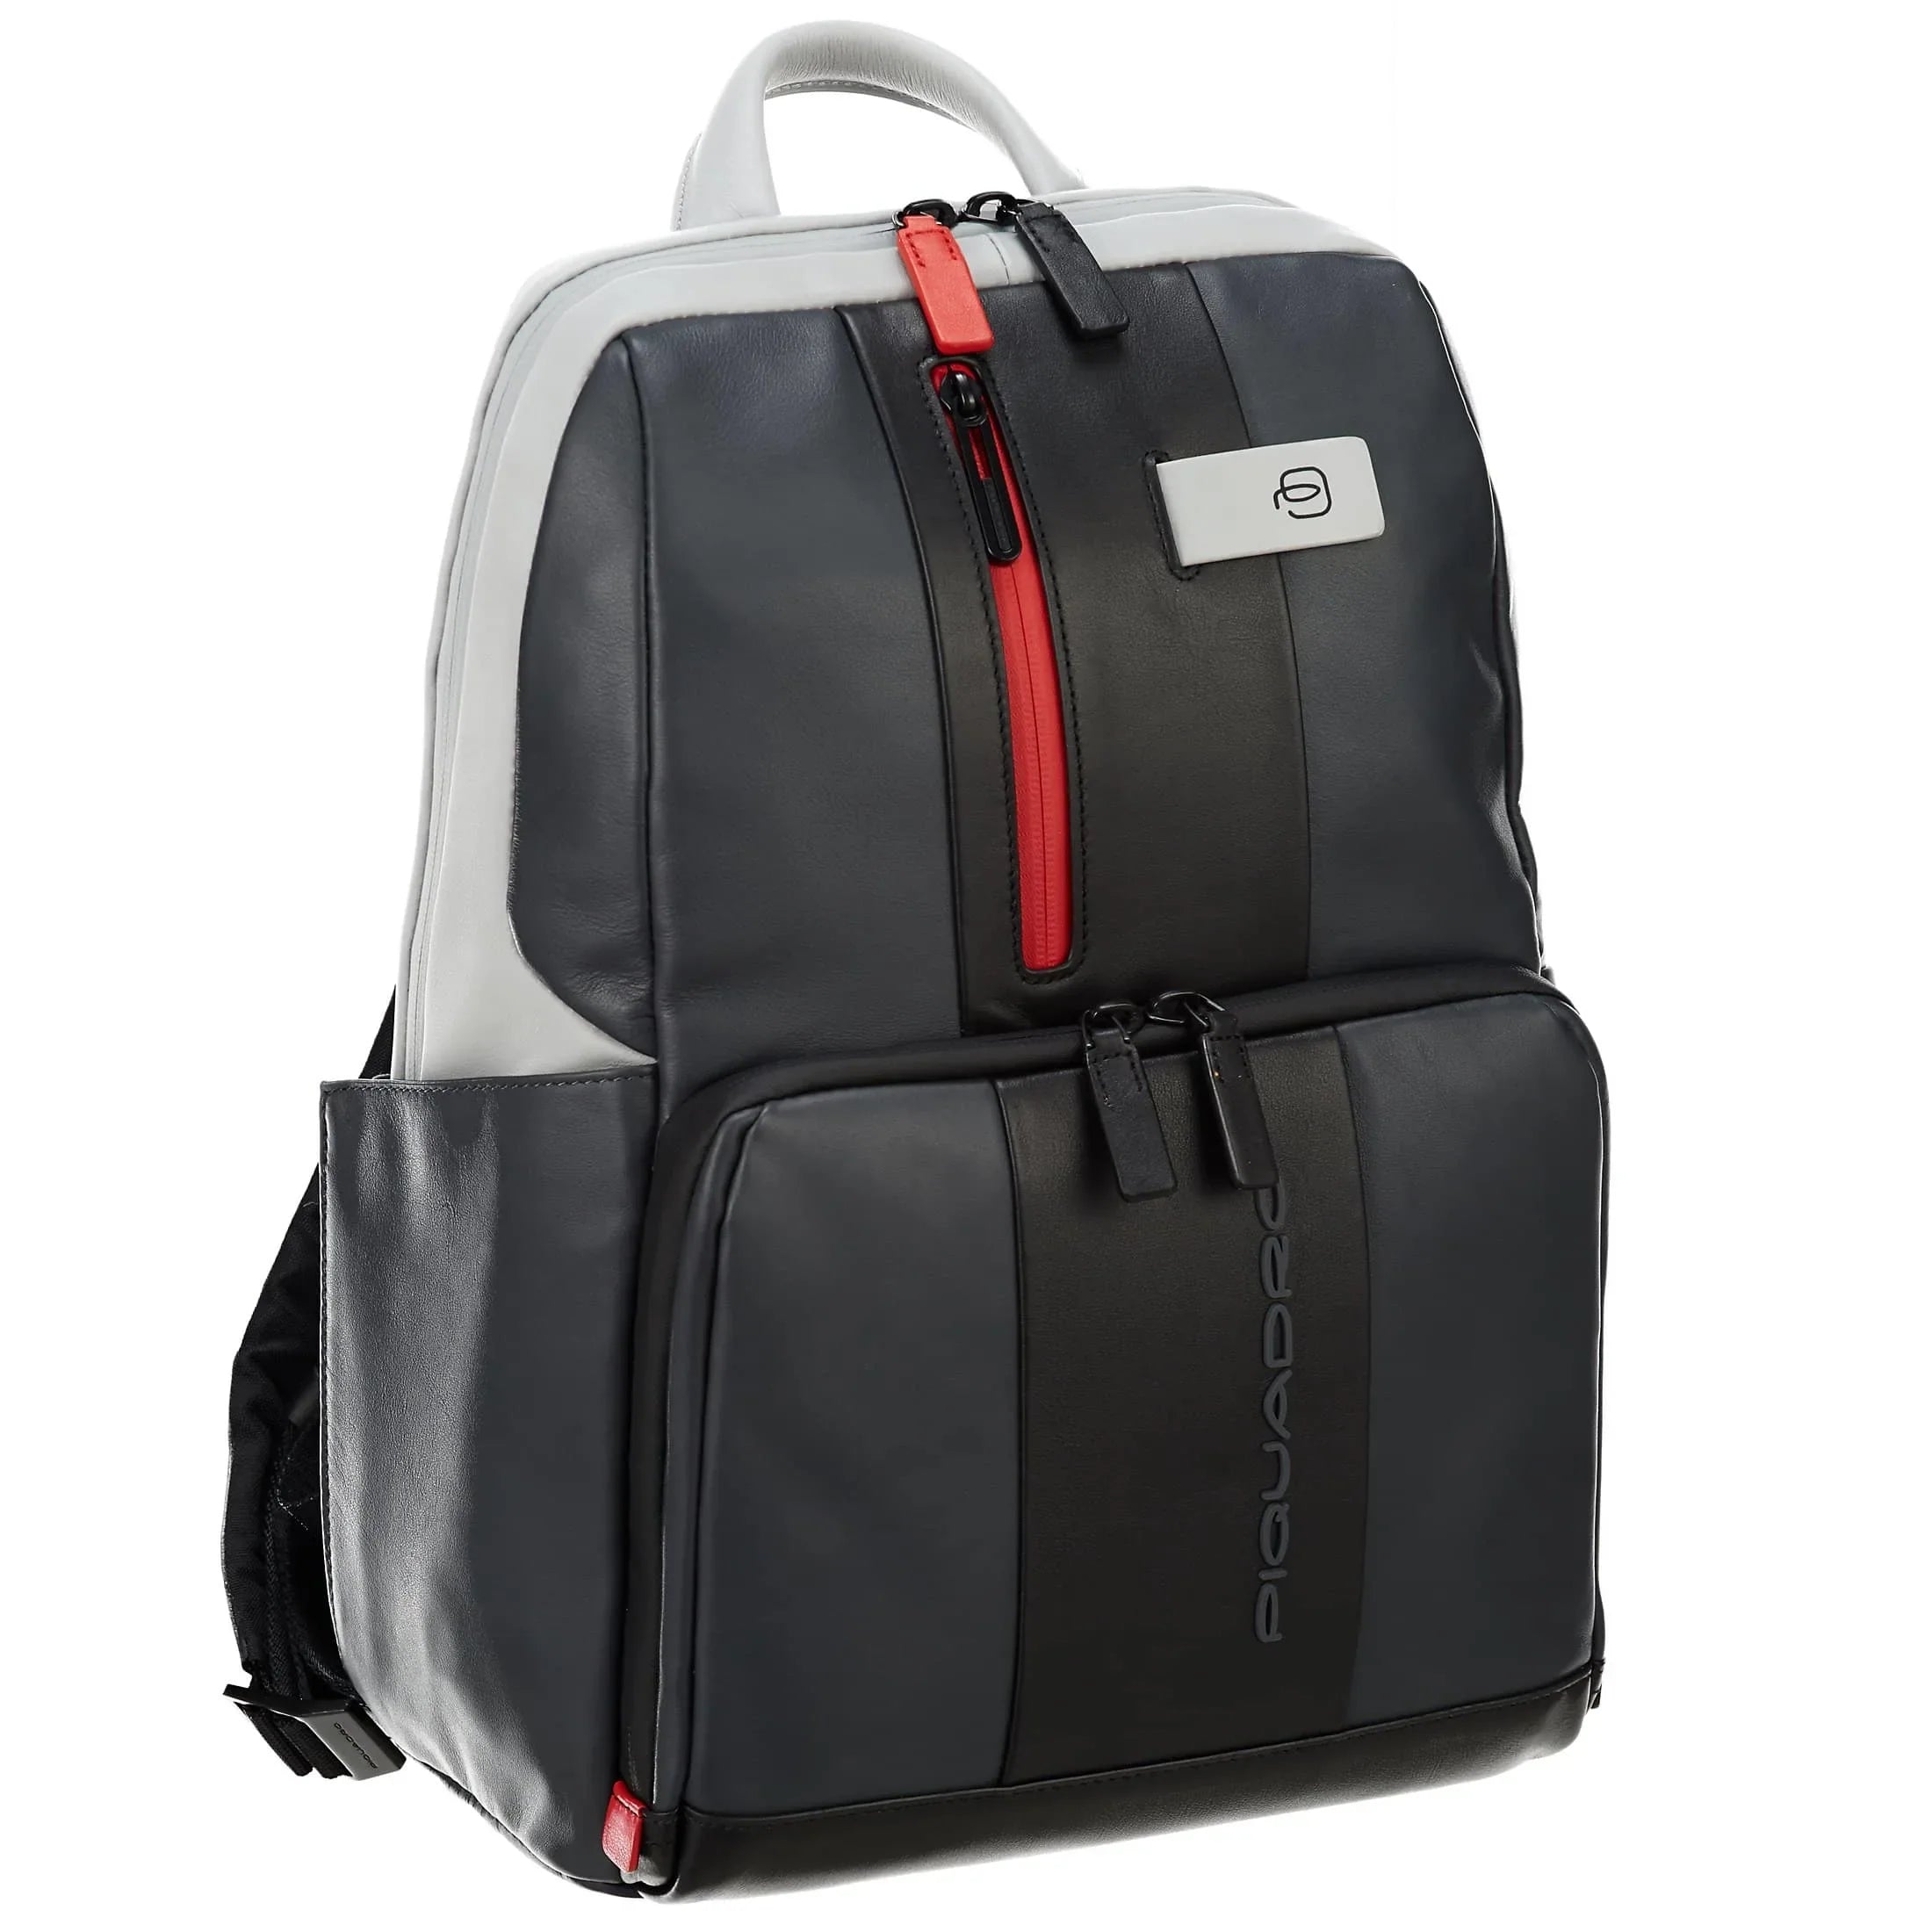 Piquadro Urban backpack with laptop compartment 40 cm - gray-black